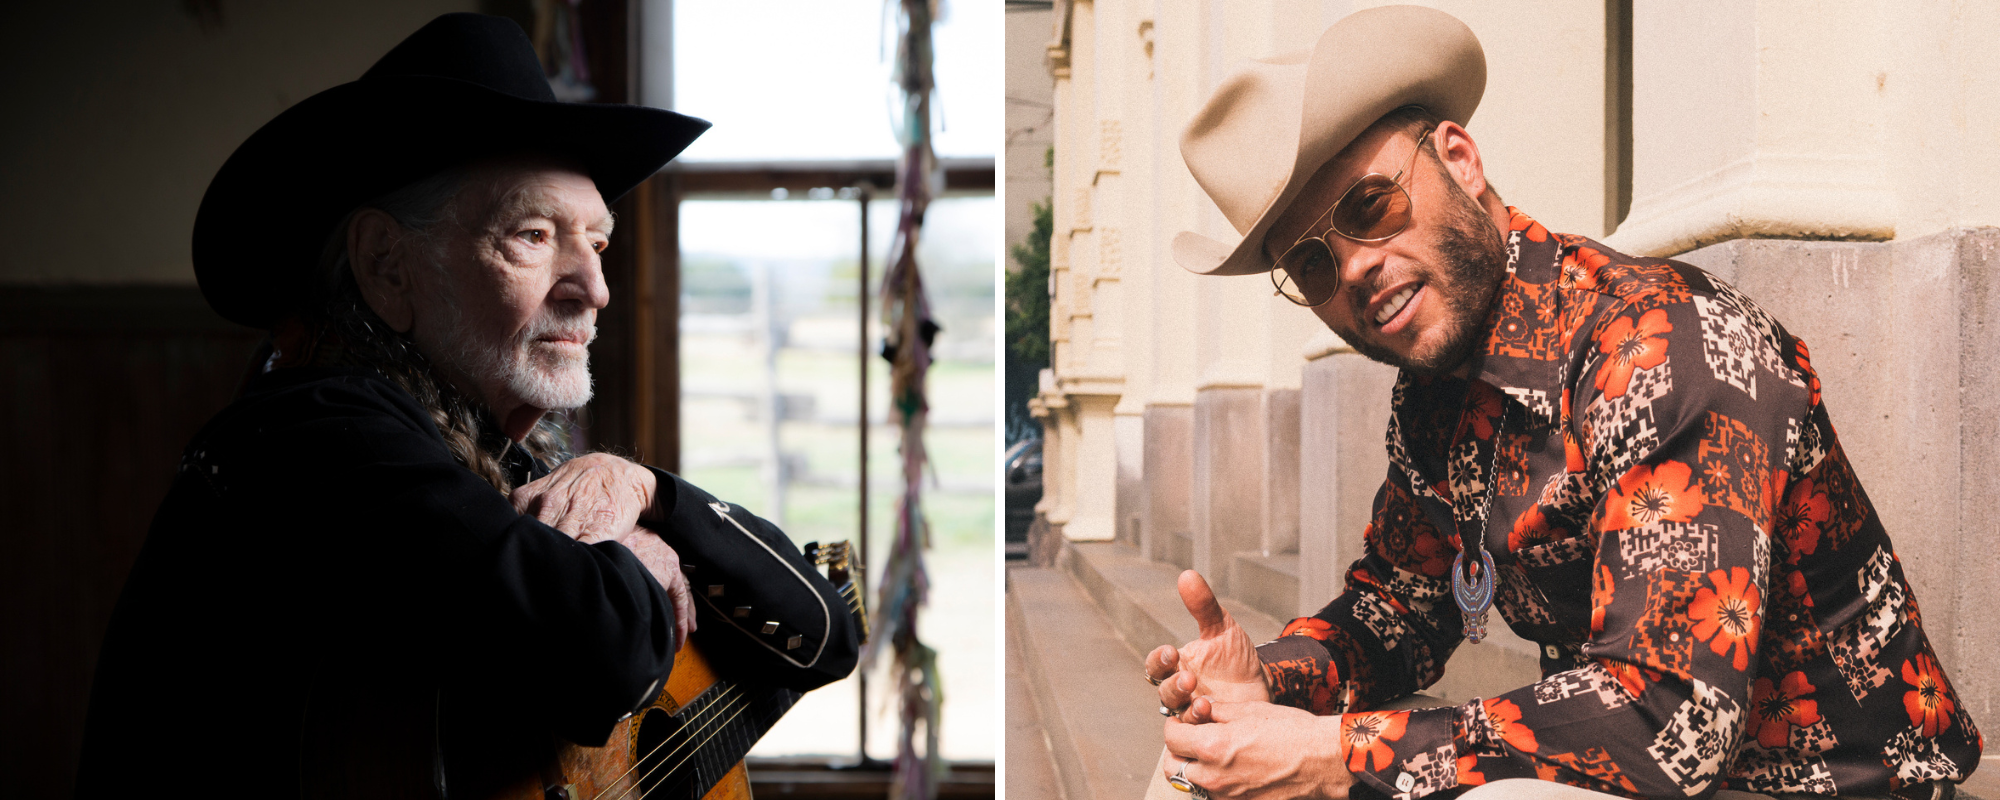 Willie Nelson and Charley Crockett Make Traditional Country Magic With New Duet “That’s What Makes the World Go Around”